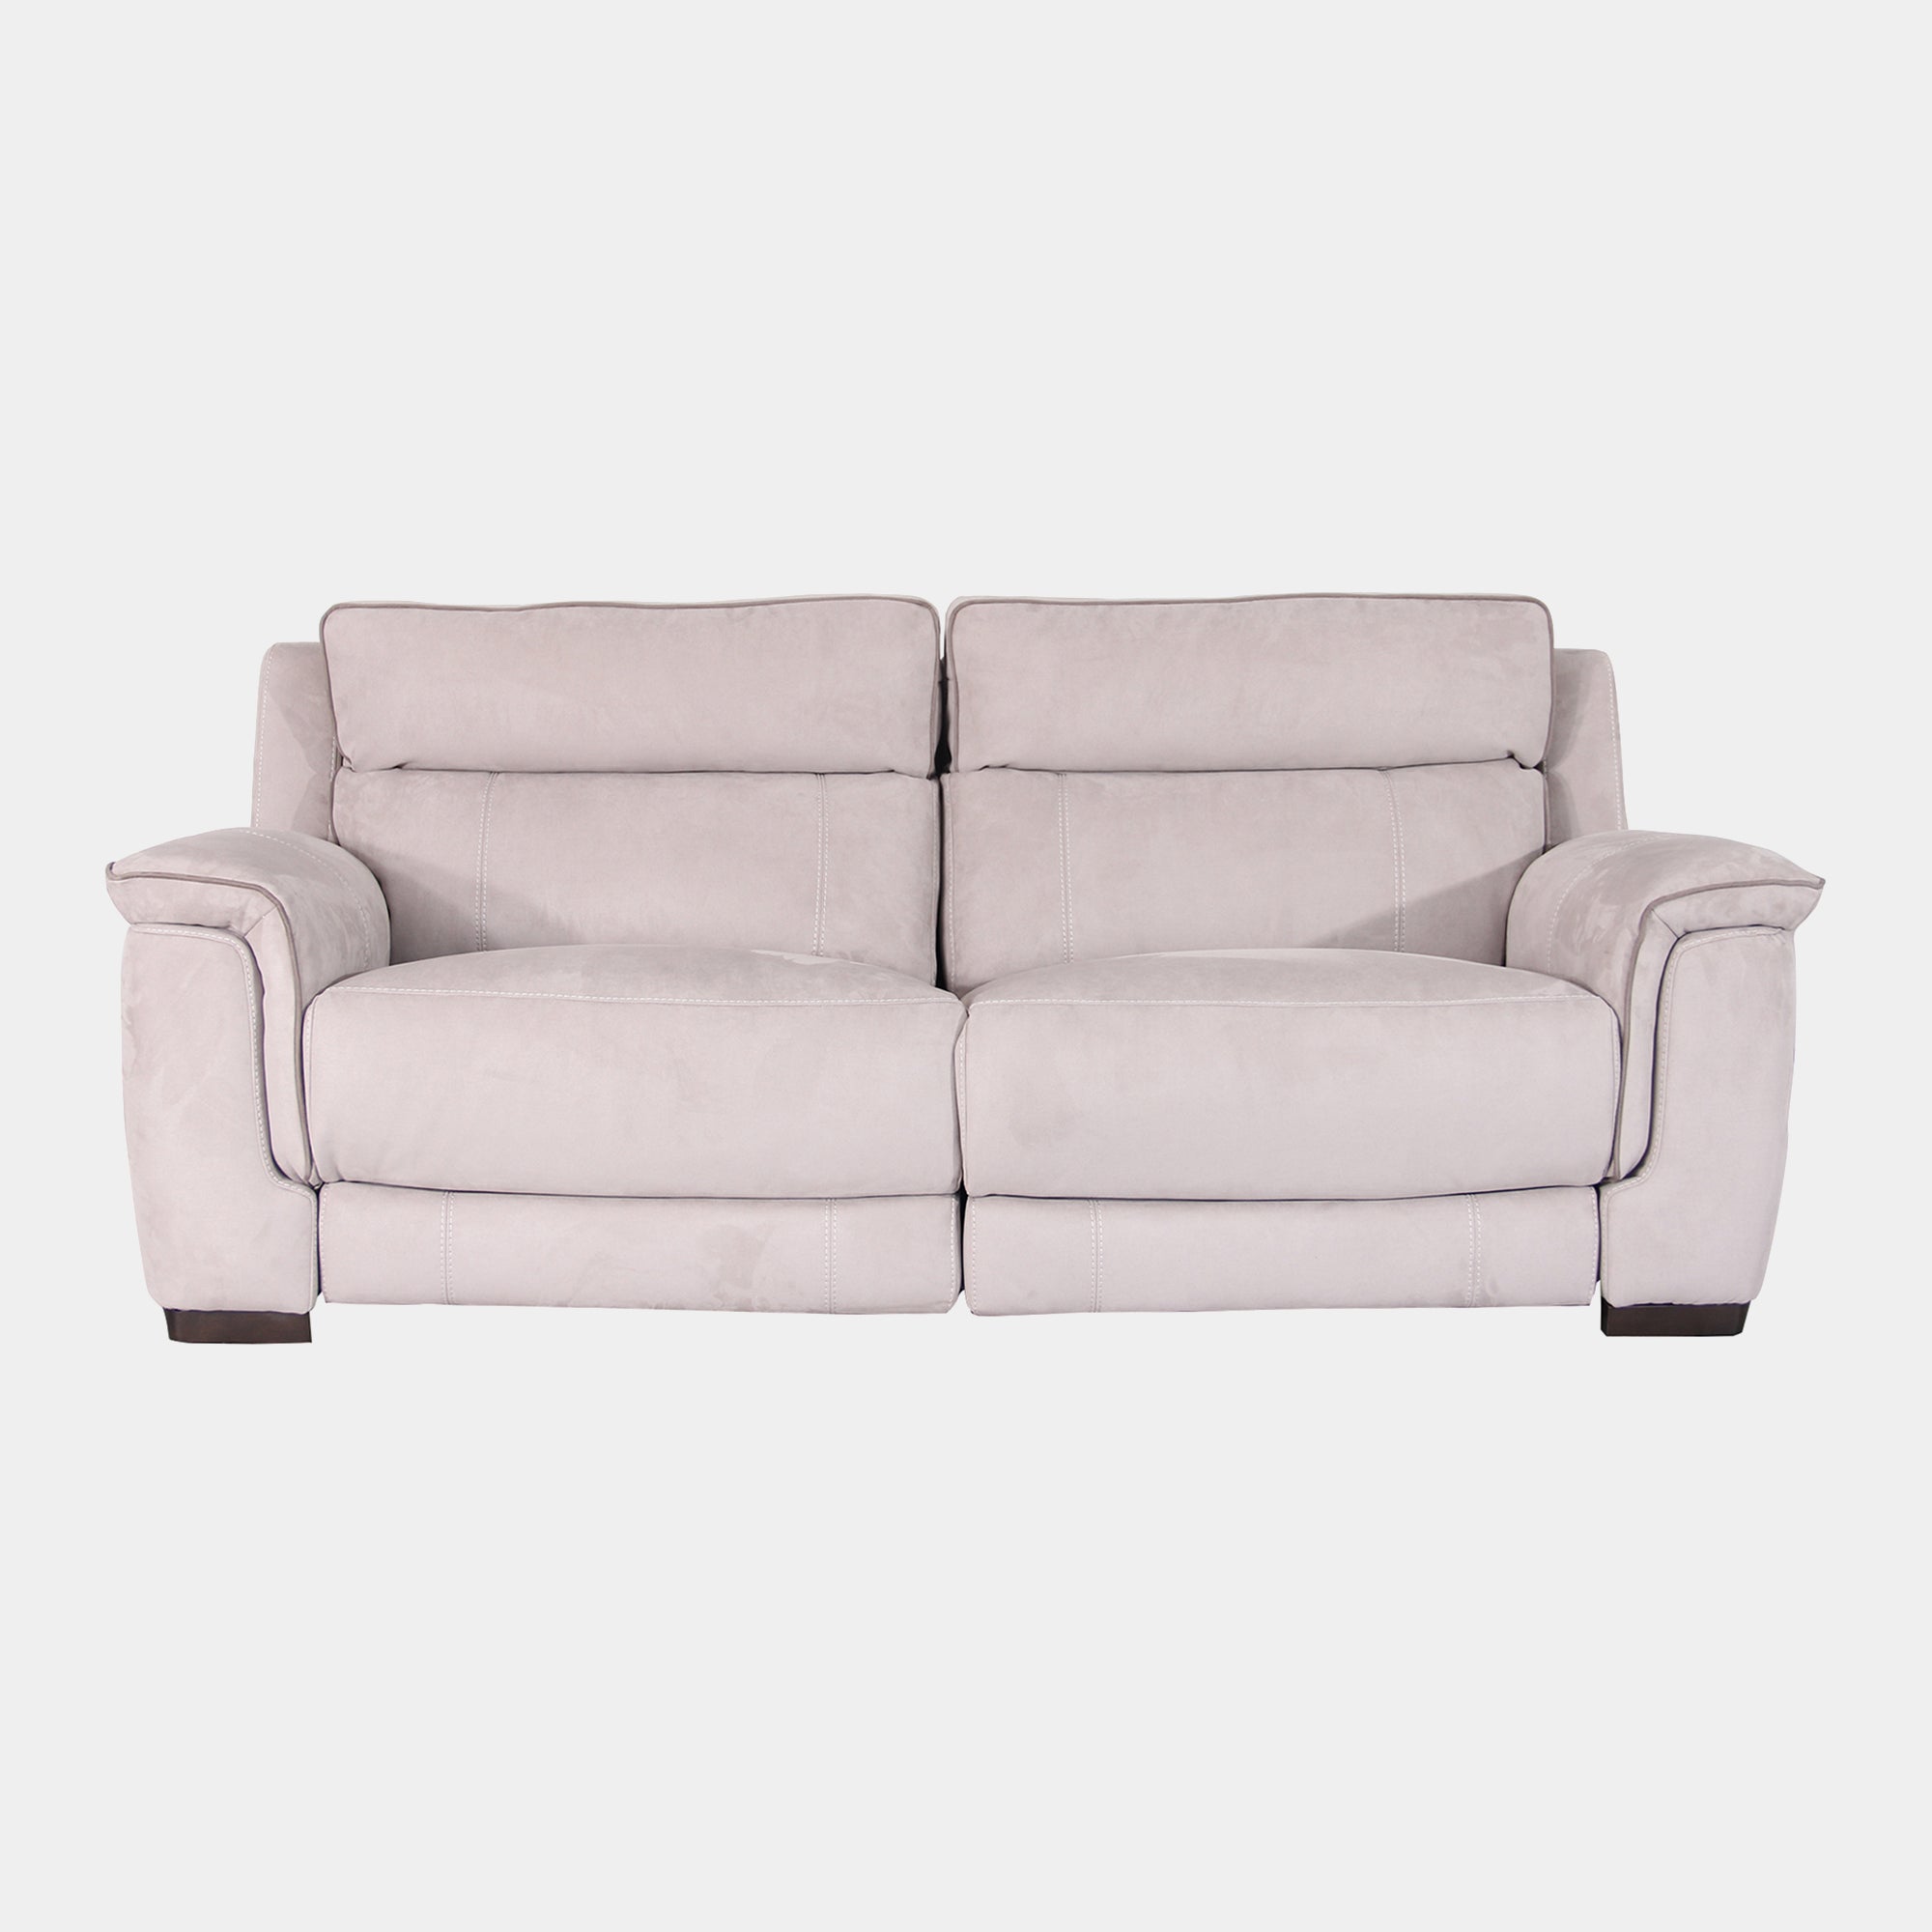 Monza - 2.5 Seat Compact Sofa With Double Power Recliner In Fabric